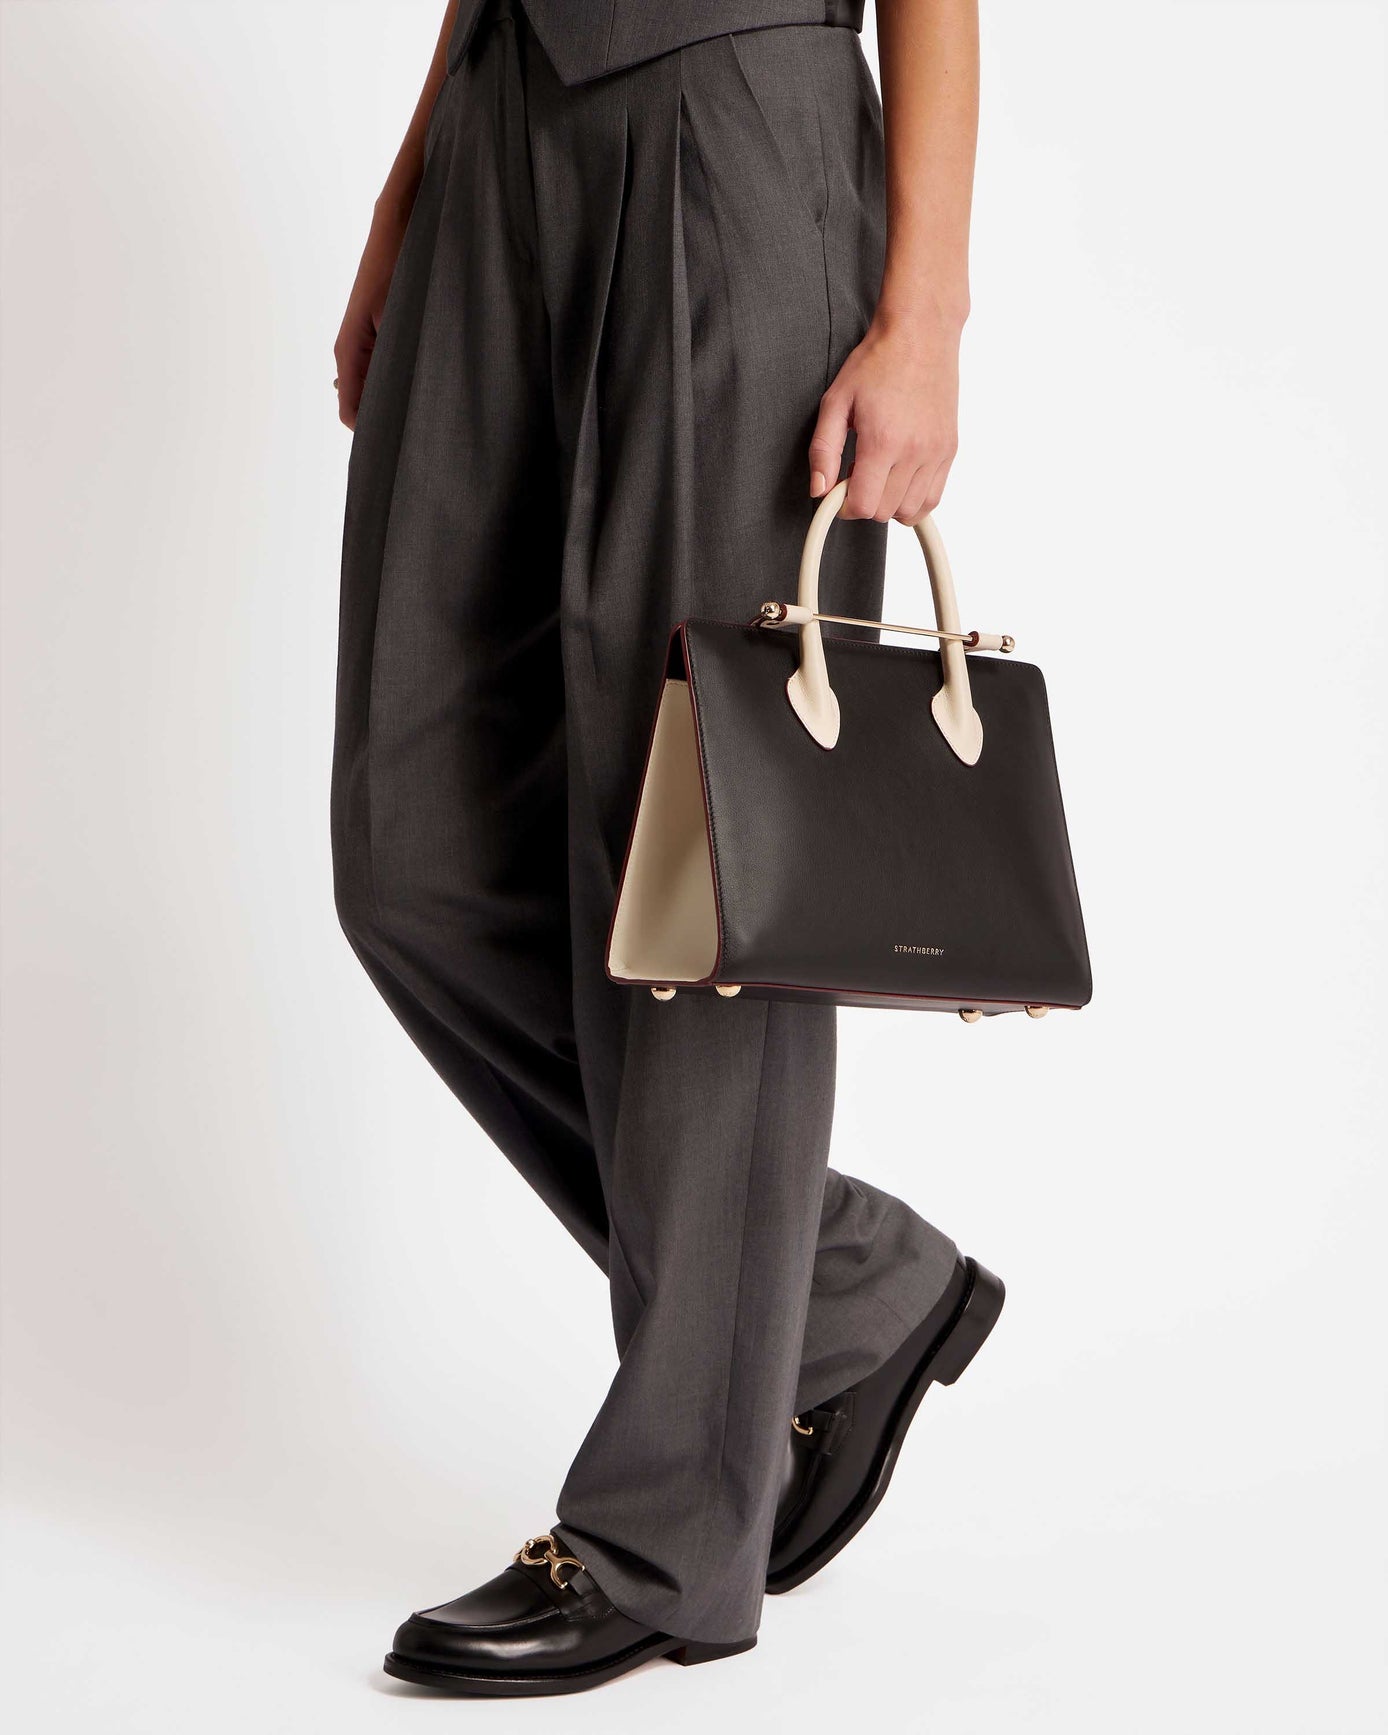 The Strathberry Midi Tote - Top Handle Leather Tote Bag - Black ...